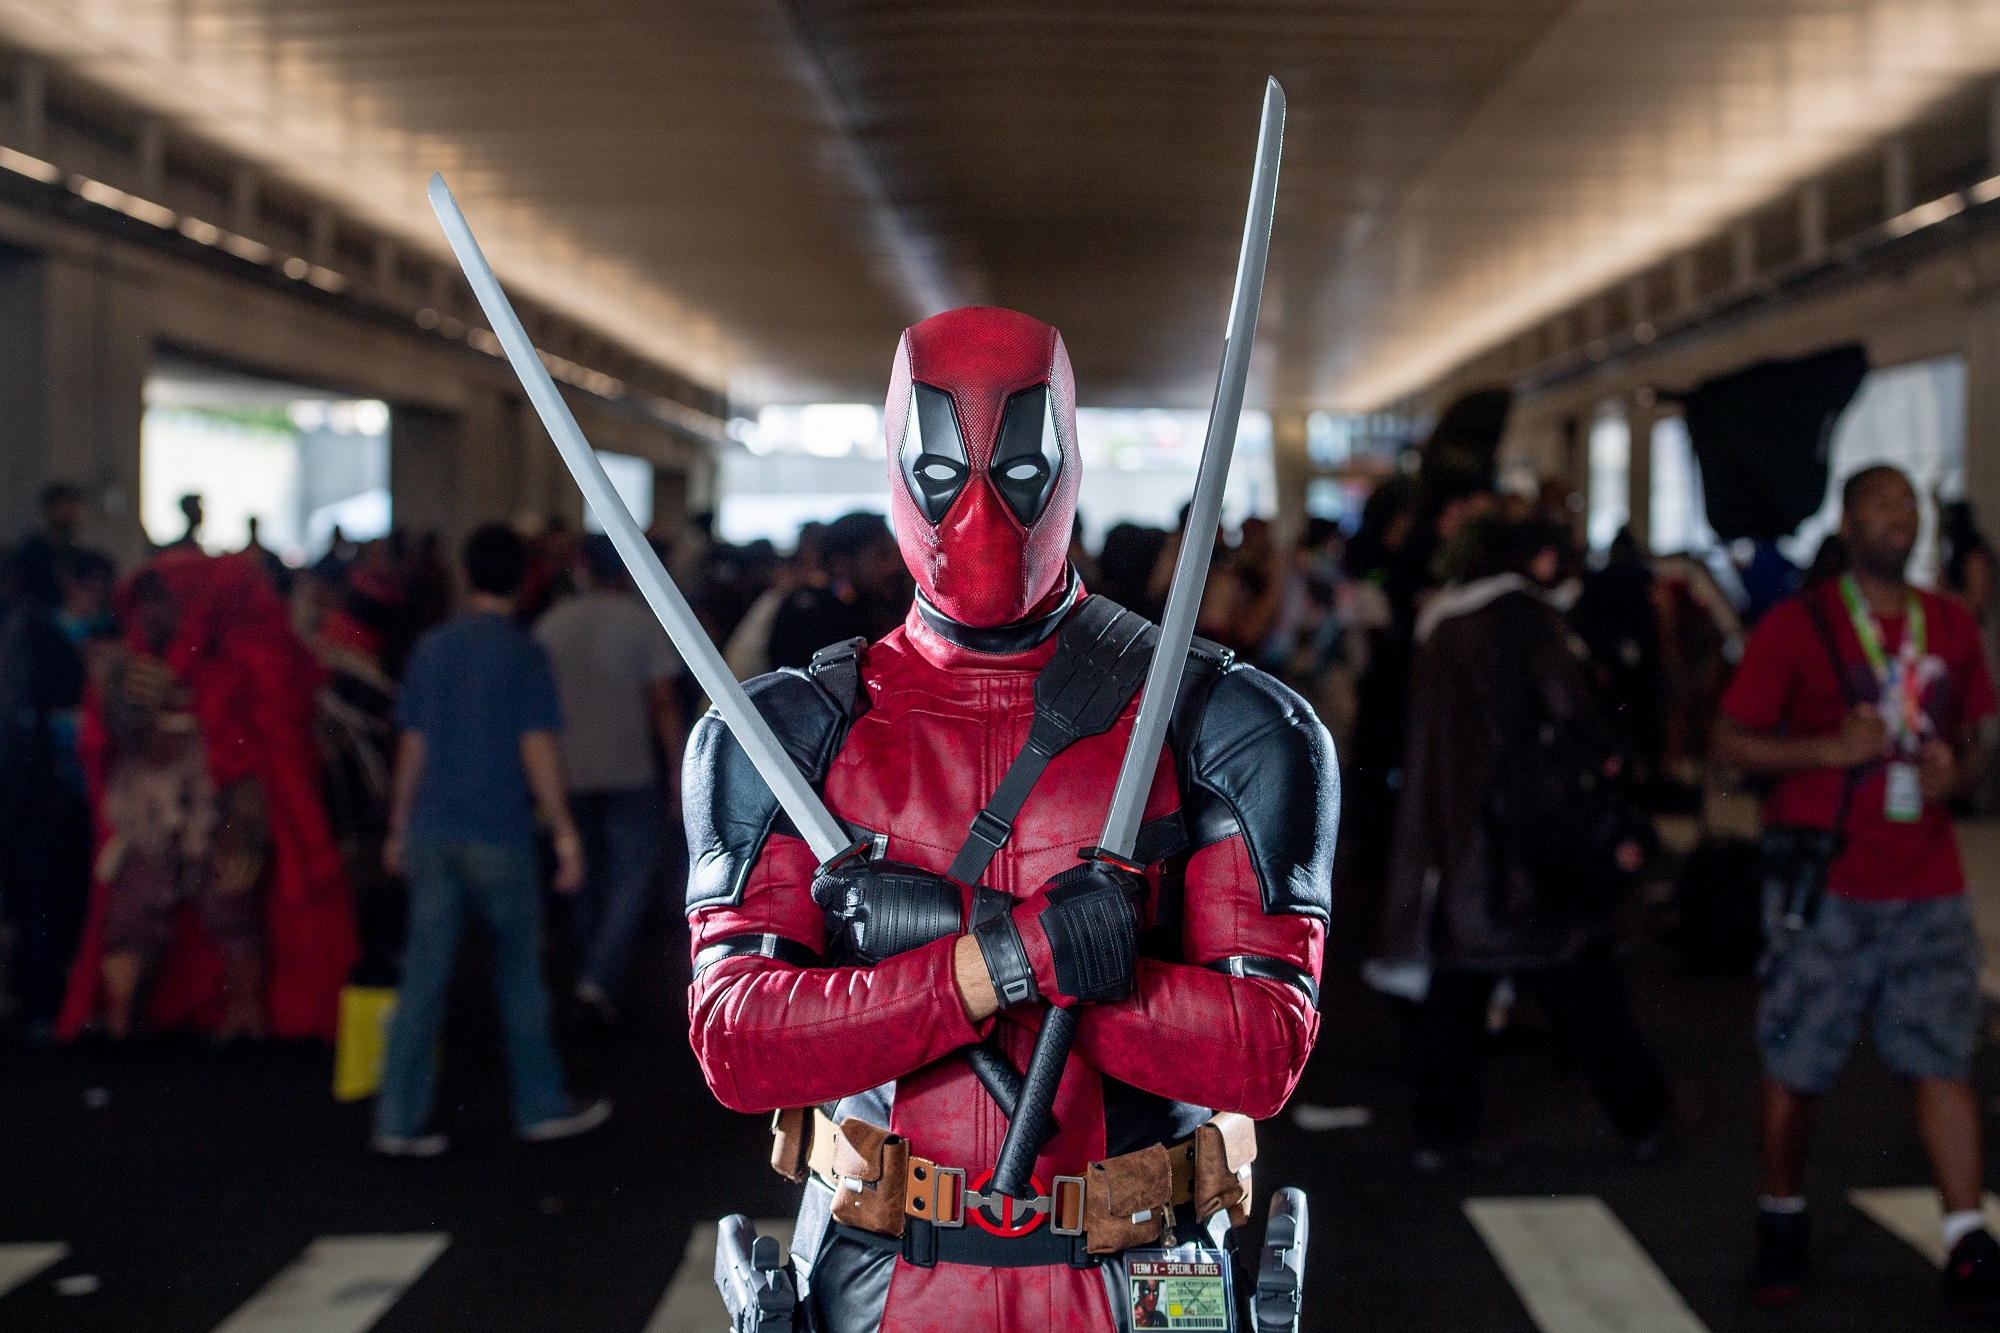 A fan cosplays as Deadpool from the Marvel Universe during the 2018 New York Comic-Con at on October 7, 2018.